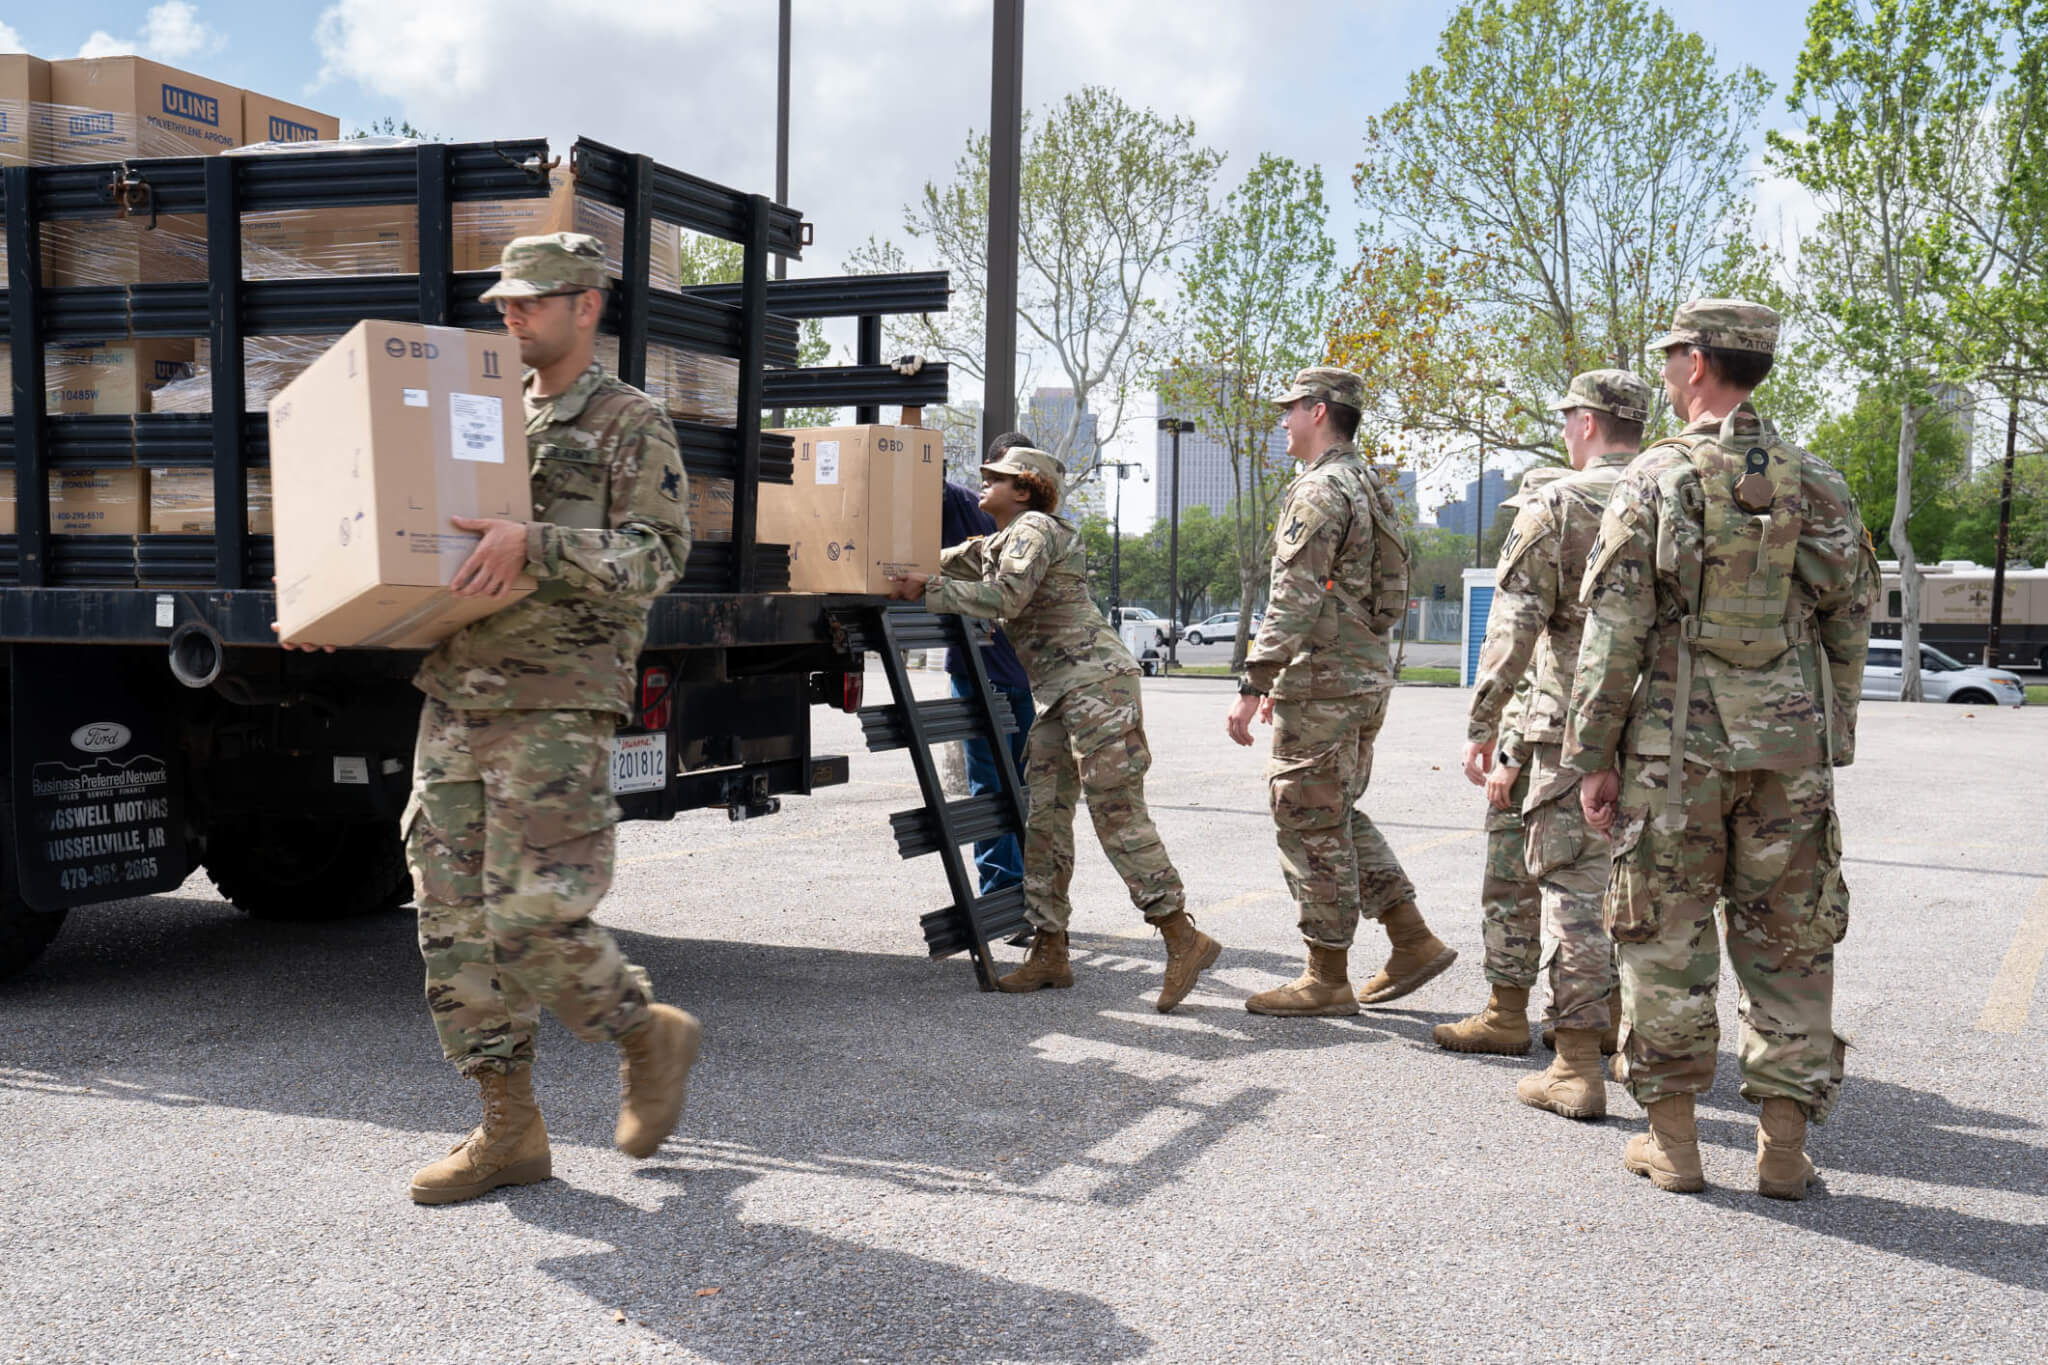 Soldiers and Airmen unload COVID-19 testing supplies and protective
equipment, March 19, 2020. Three testing sites are scheduled to open across
New Orleans and Jefferson Parish. Photo by Staff
Sgt. Josiah Pugh.